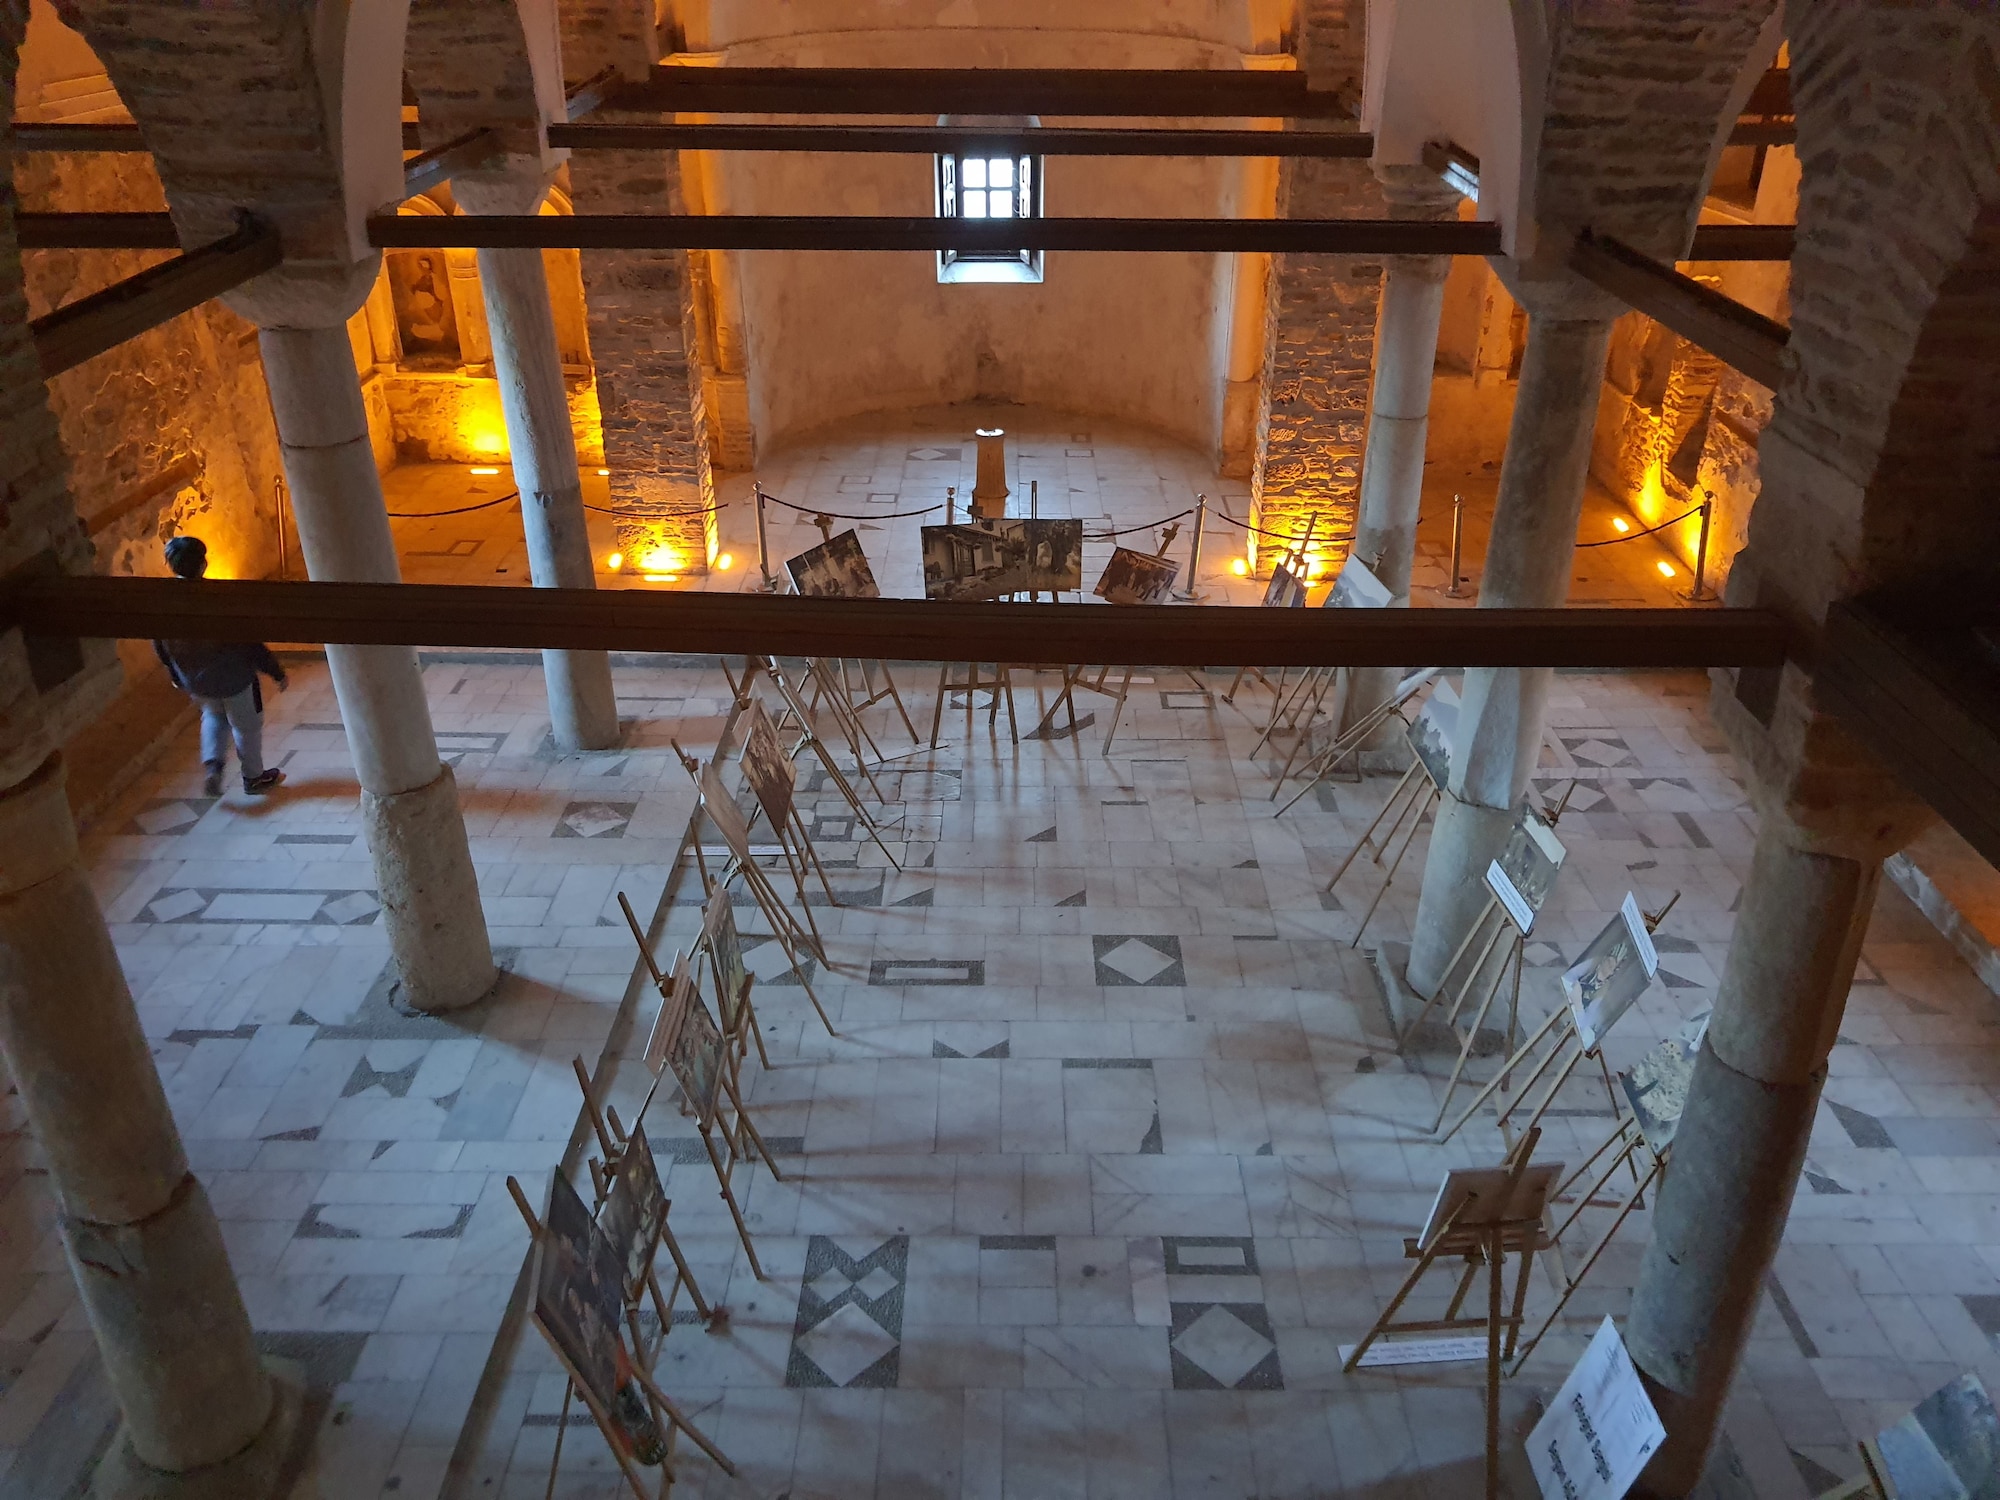 An interior view of the St. John, the Baptist Church in Şirince Feb. 19, 2022. 
A restoration work was carried out by the Ephesus Museum from 1988
to 1993 in the church. The church was restored into its original form with
restoration and conservation efforts from 2015 to 2016 with the 
contributions of Izmir Governorship, Selçuk Municipality and Izmir Surveying
and Monuments Directorate. (U.S. Air Force photo by Tanju Varlıklı)